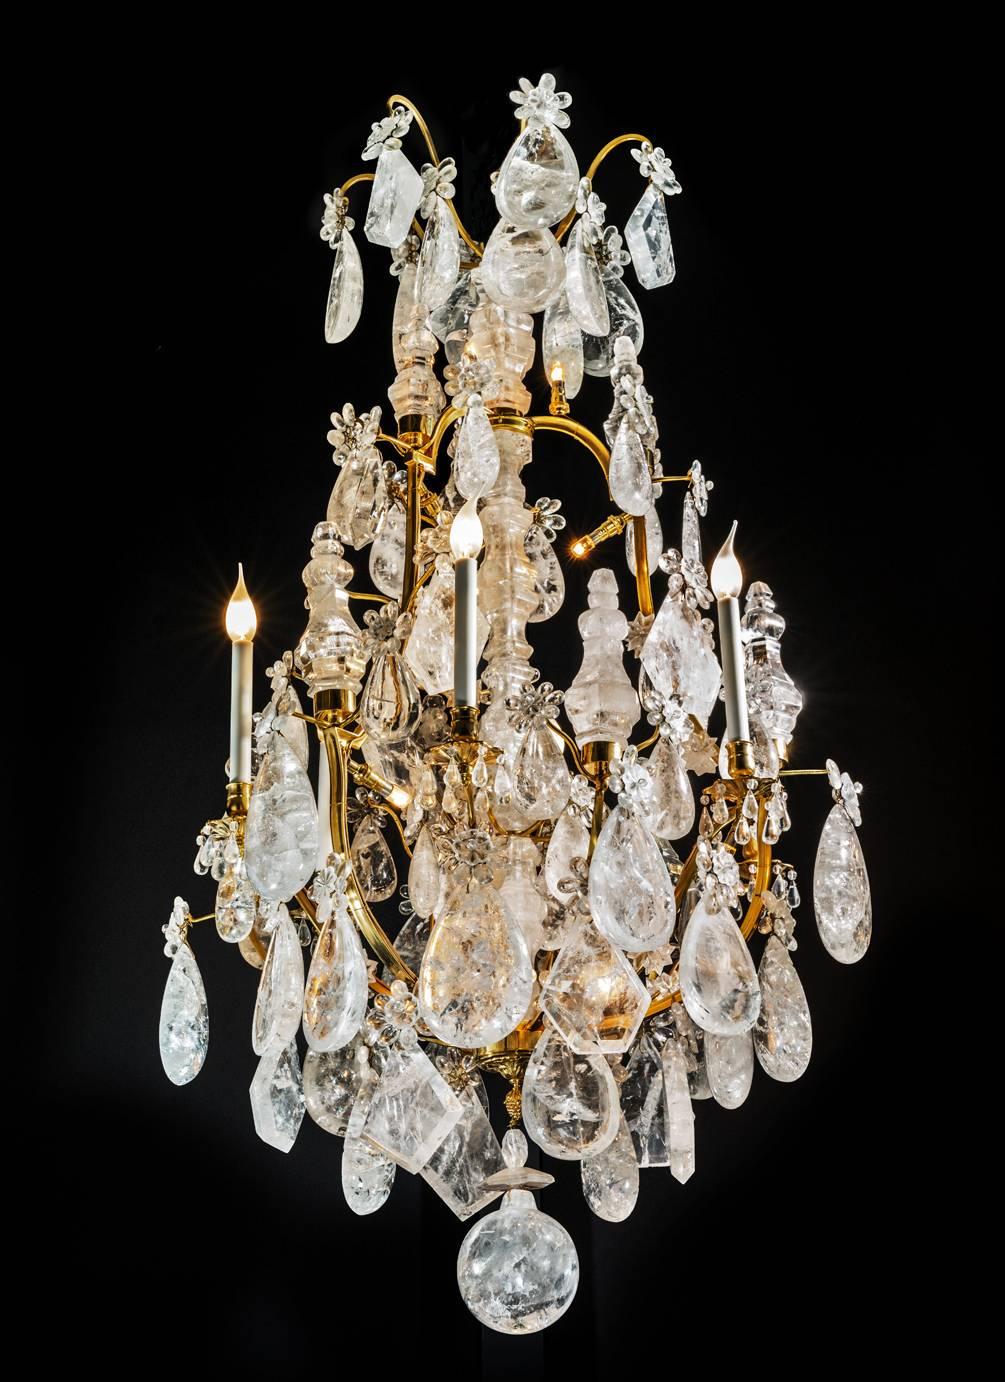 French ormolu bronze chandelier in the style of Louis the XV .
Modern rock crystal quartz stones  specially carved for this model.
No one chandelier in the world have such size of stone in this dimension .
Make this chandelier one of the most